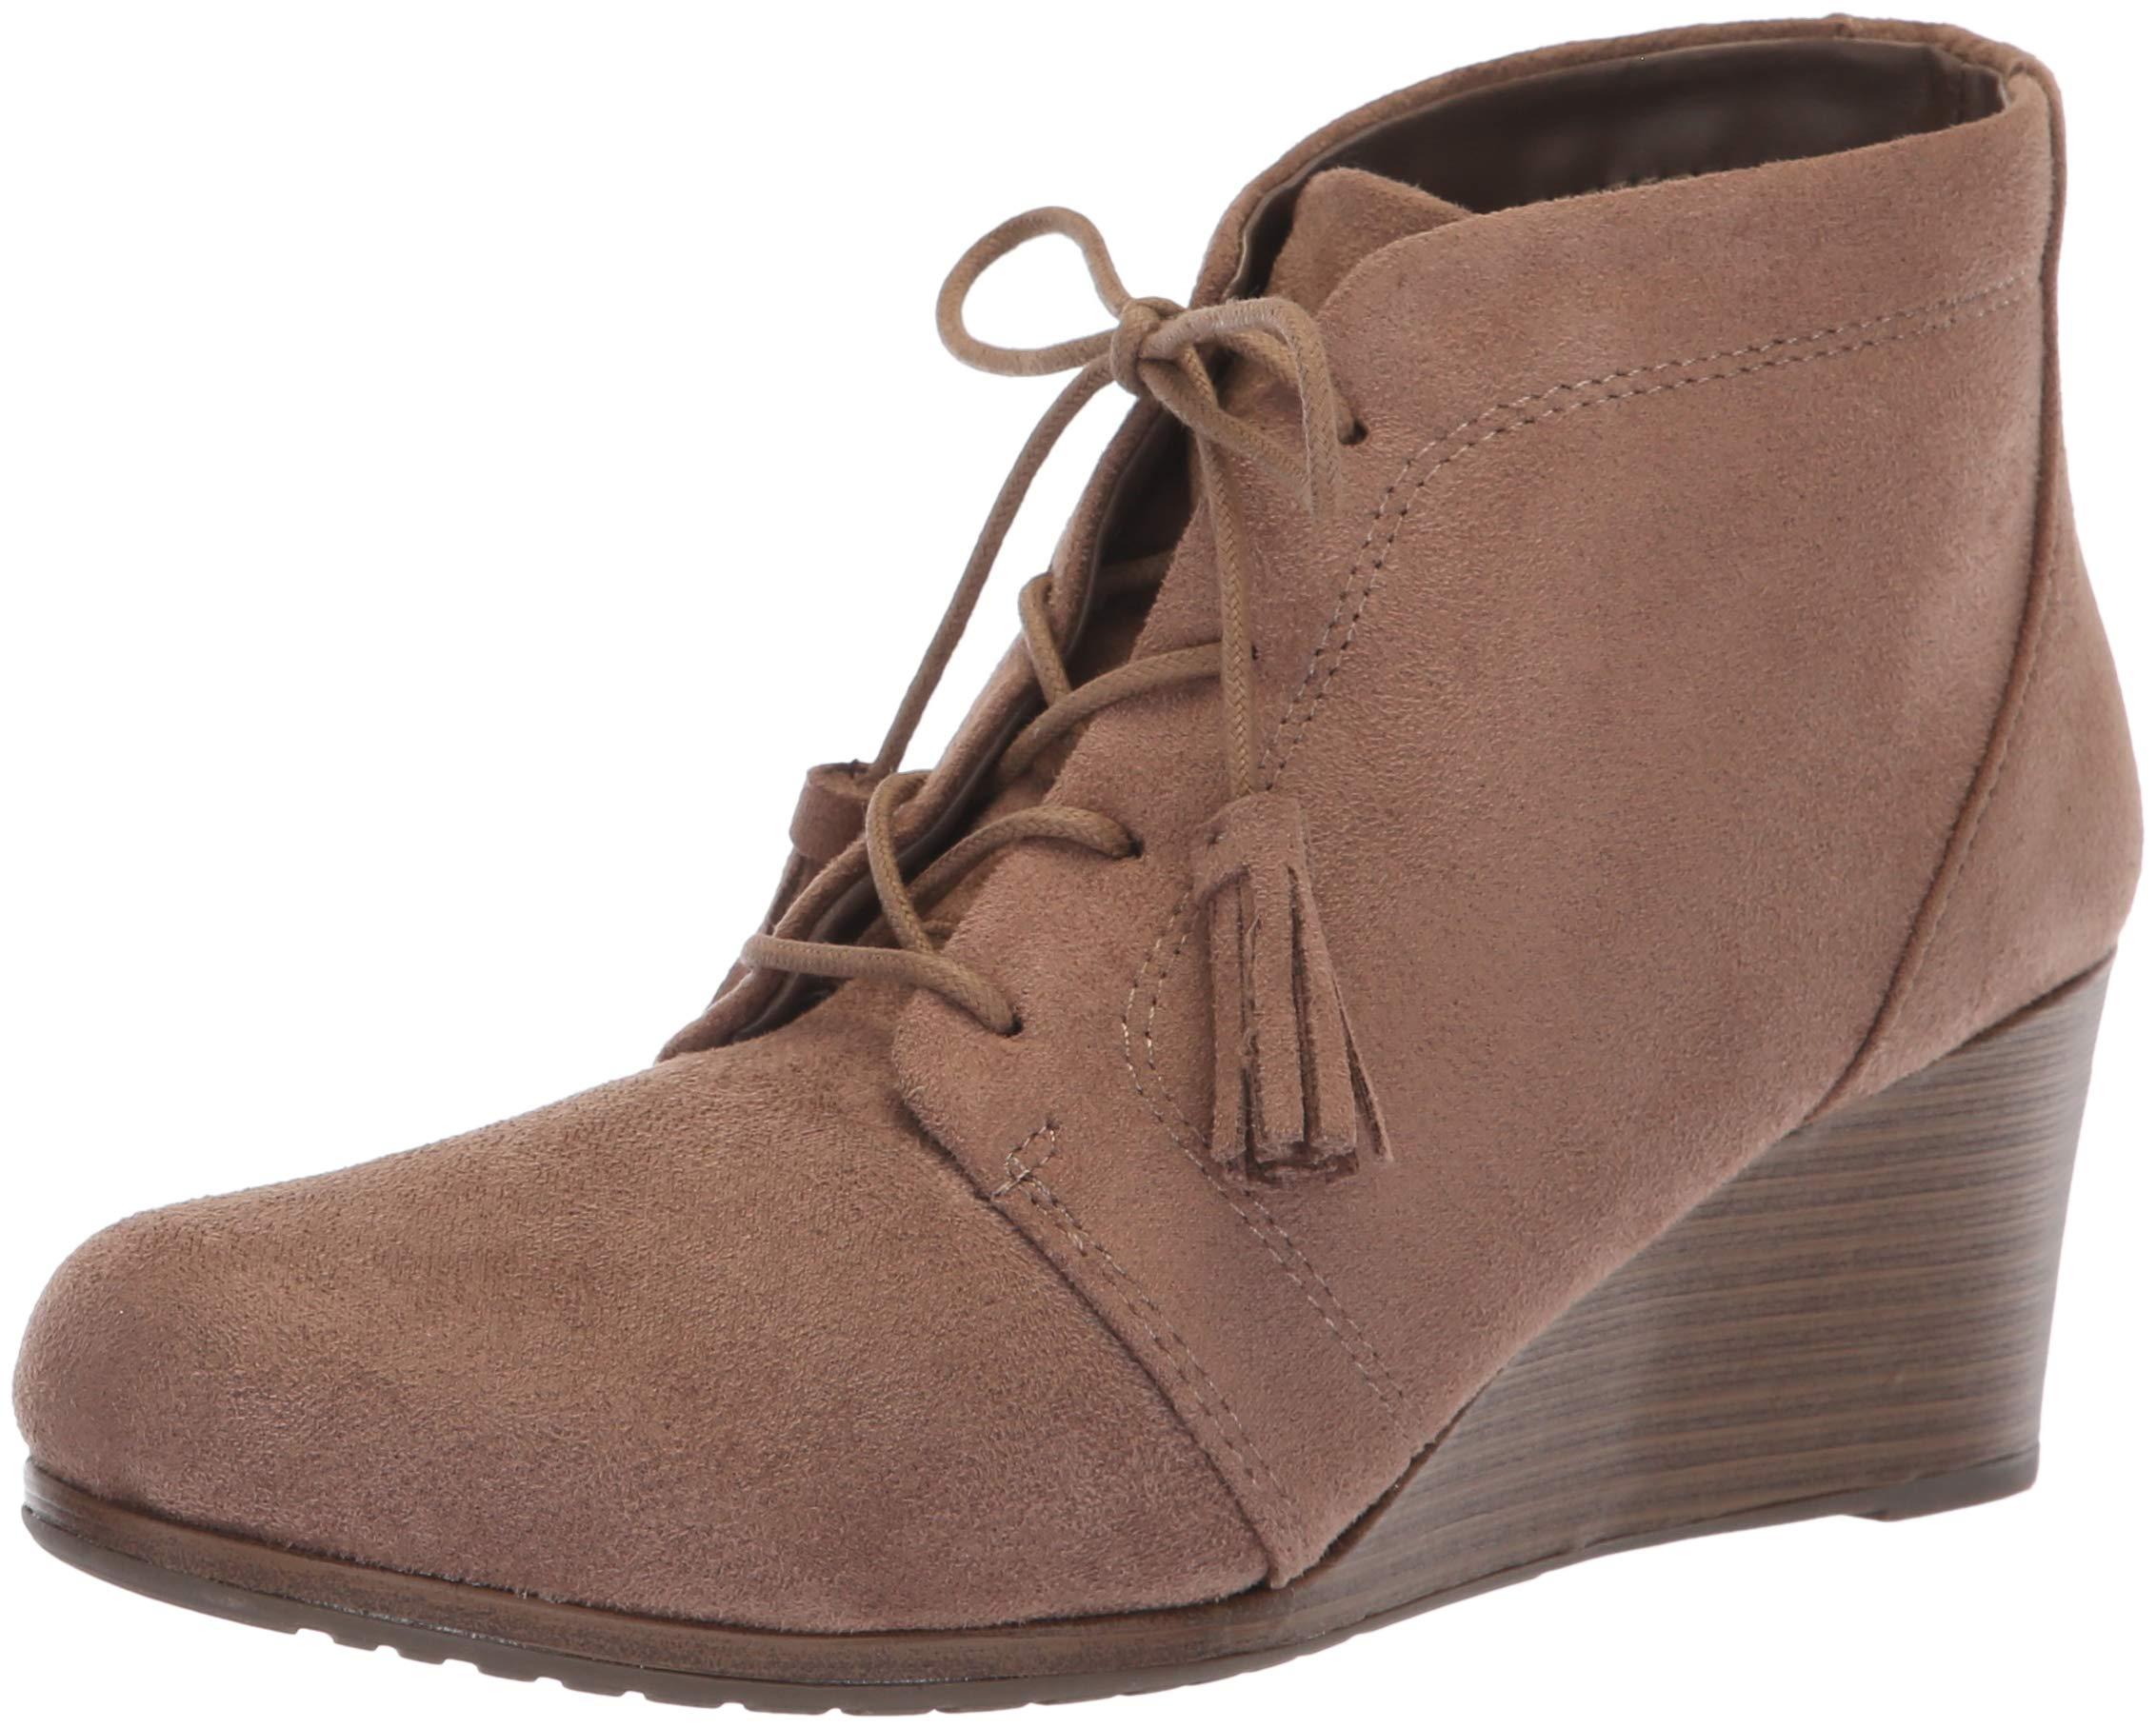 Dr. Scholls Kennedy Ankle Boot in Brown 